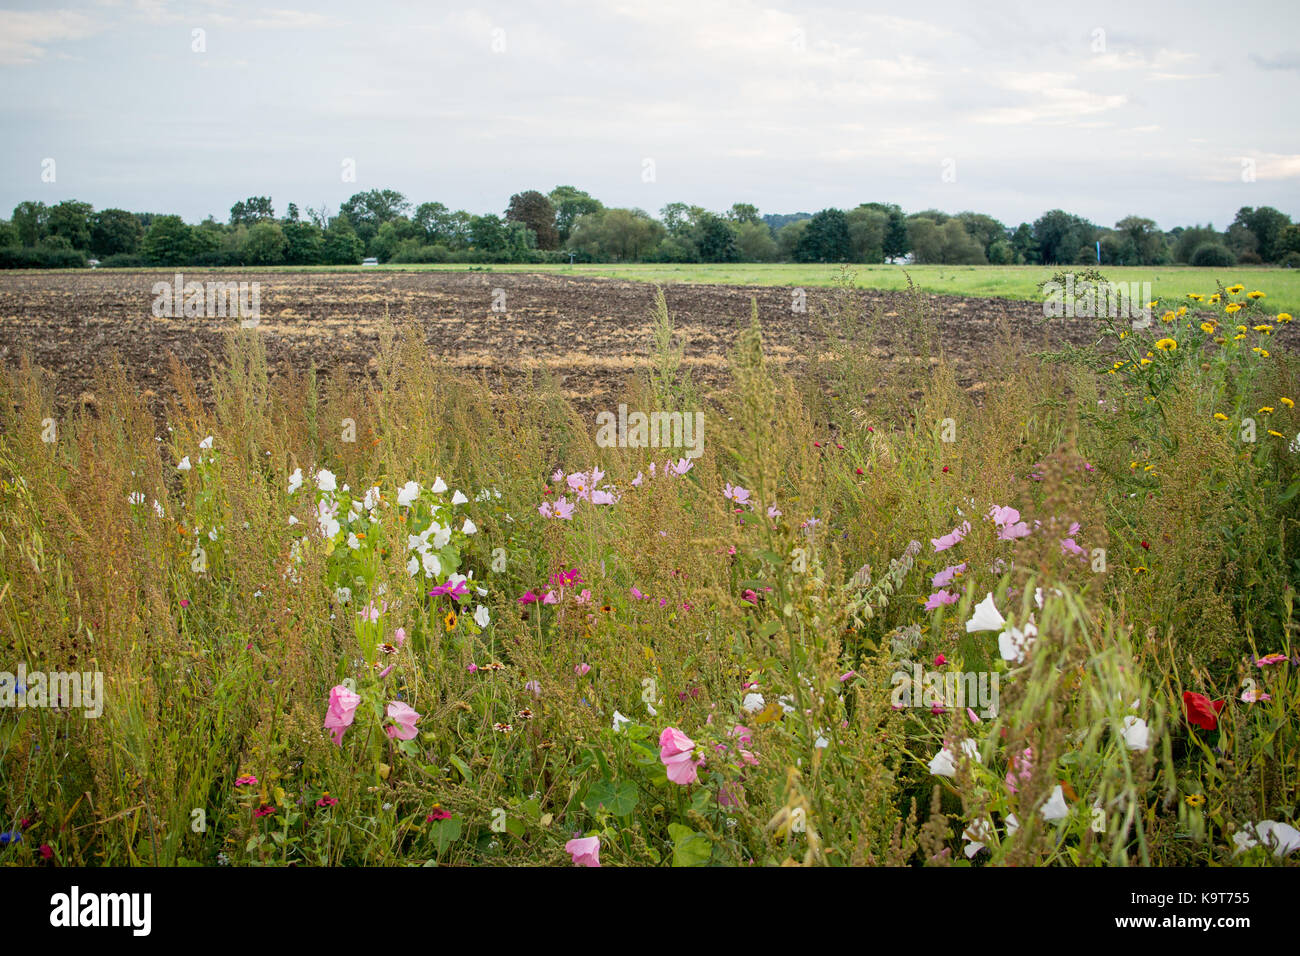 Wildflower field margins between the towns of Eton and Eton Wick, Berkshire, England. Stock Photo